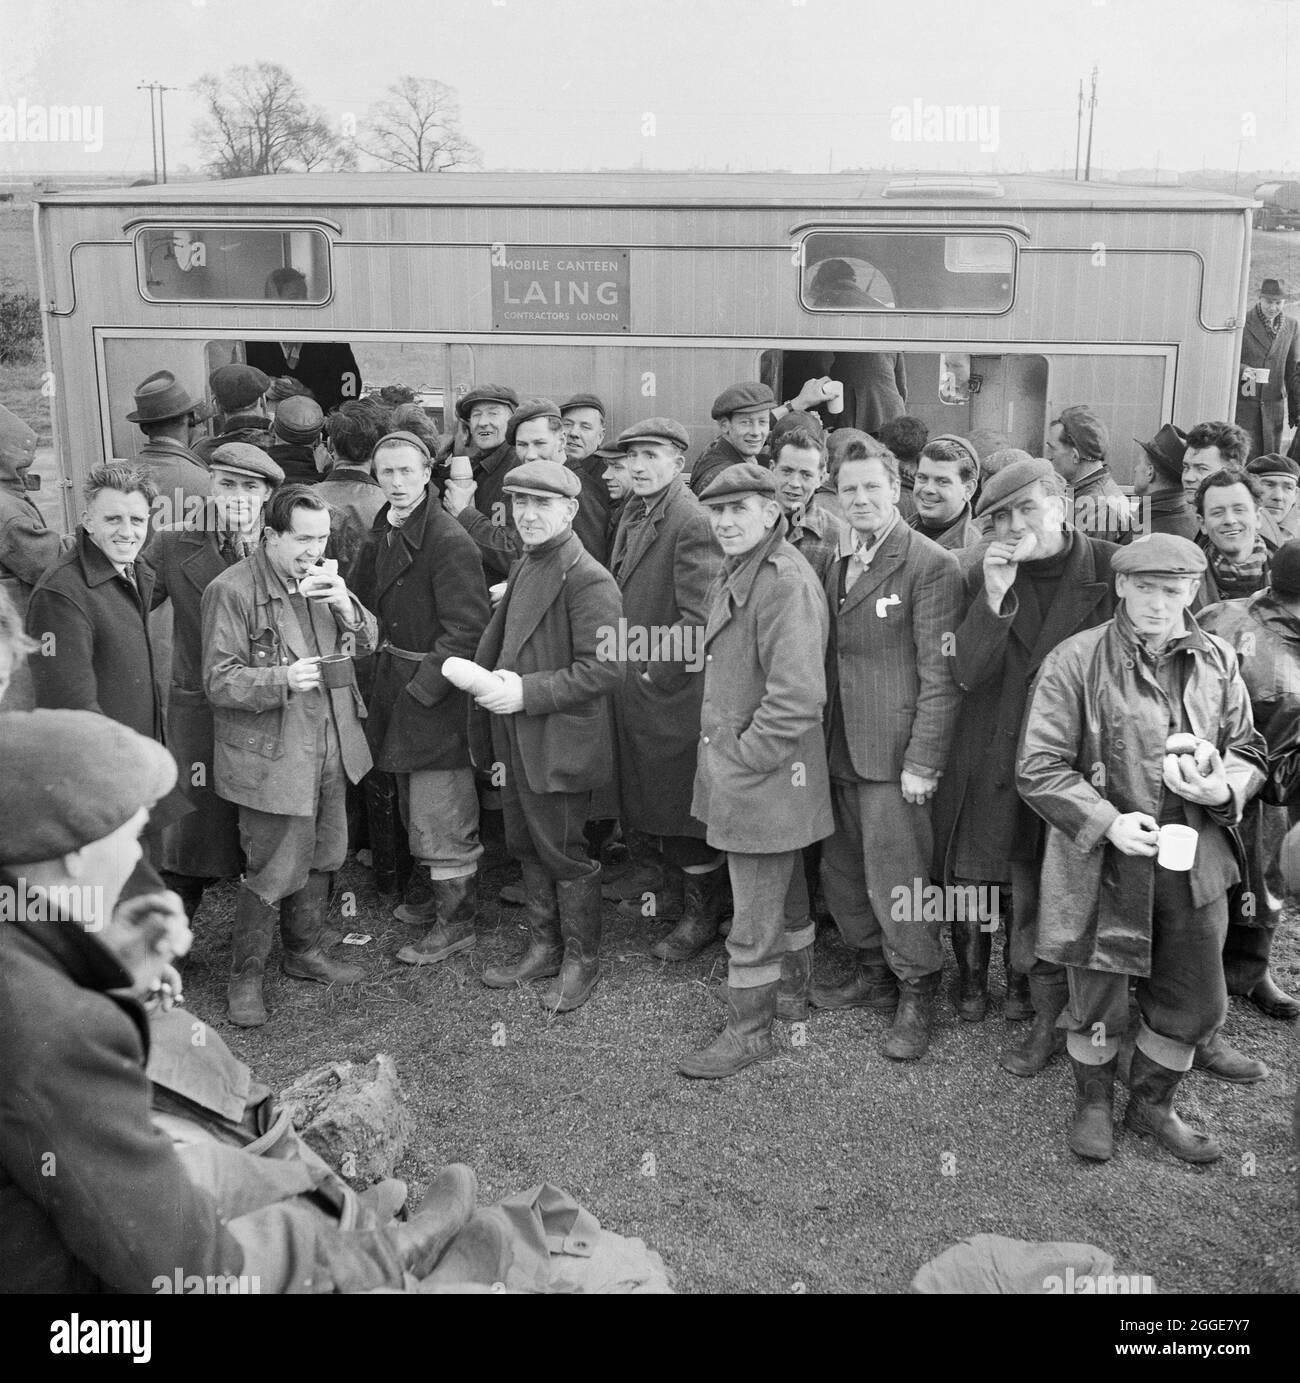 A large group of Laing workers using a mobile canteen following severe flooding on the construction site of Coryton Oil Refinery. On the night of Saturday 31st January through to the morning of Sunday 1st February 1953, severe floods struck parts of the UK, Scotland, Belgium and the Netherlands. The natural disaster is often referred to as the North Sea Flood of 1953. Severe flooding occurred along the east coast of the UK. The site of Coryton Oil Refinery flooded as the river wall protecting the site was breached in 14 places. An article detailing the disaster and subsequent recovery operatio Stock Photo